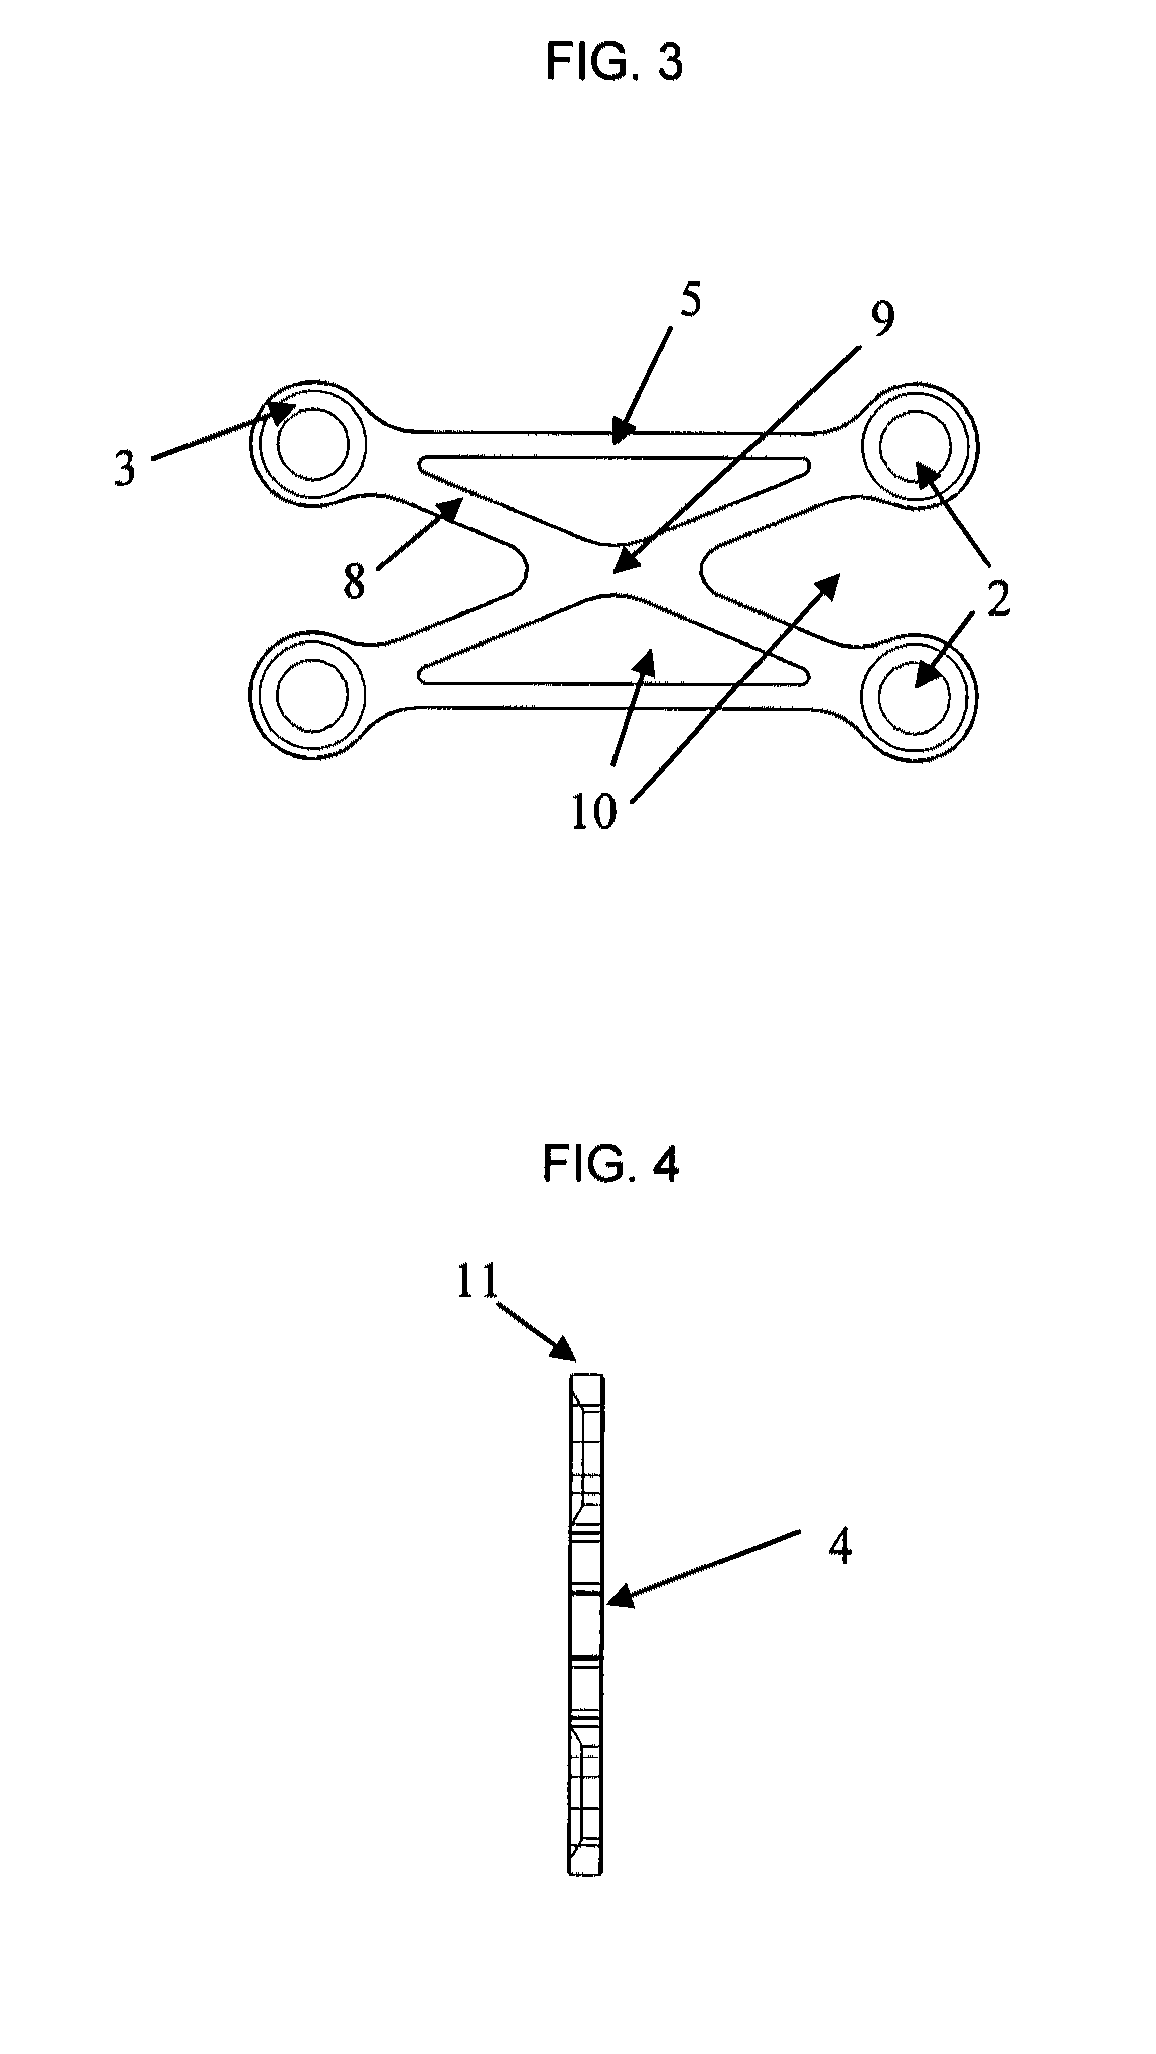 Osteosynthesis plate, method of customizing same, and method for installing same